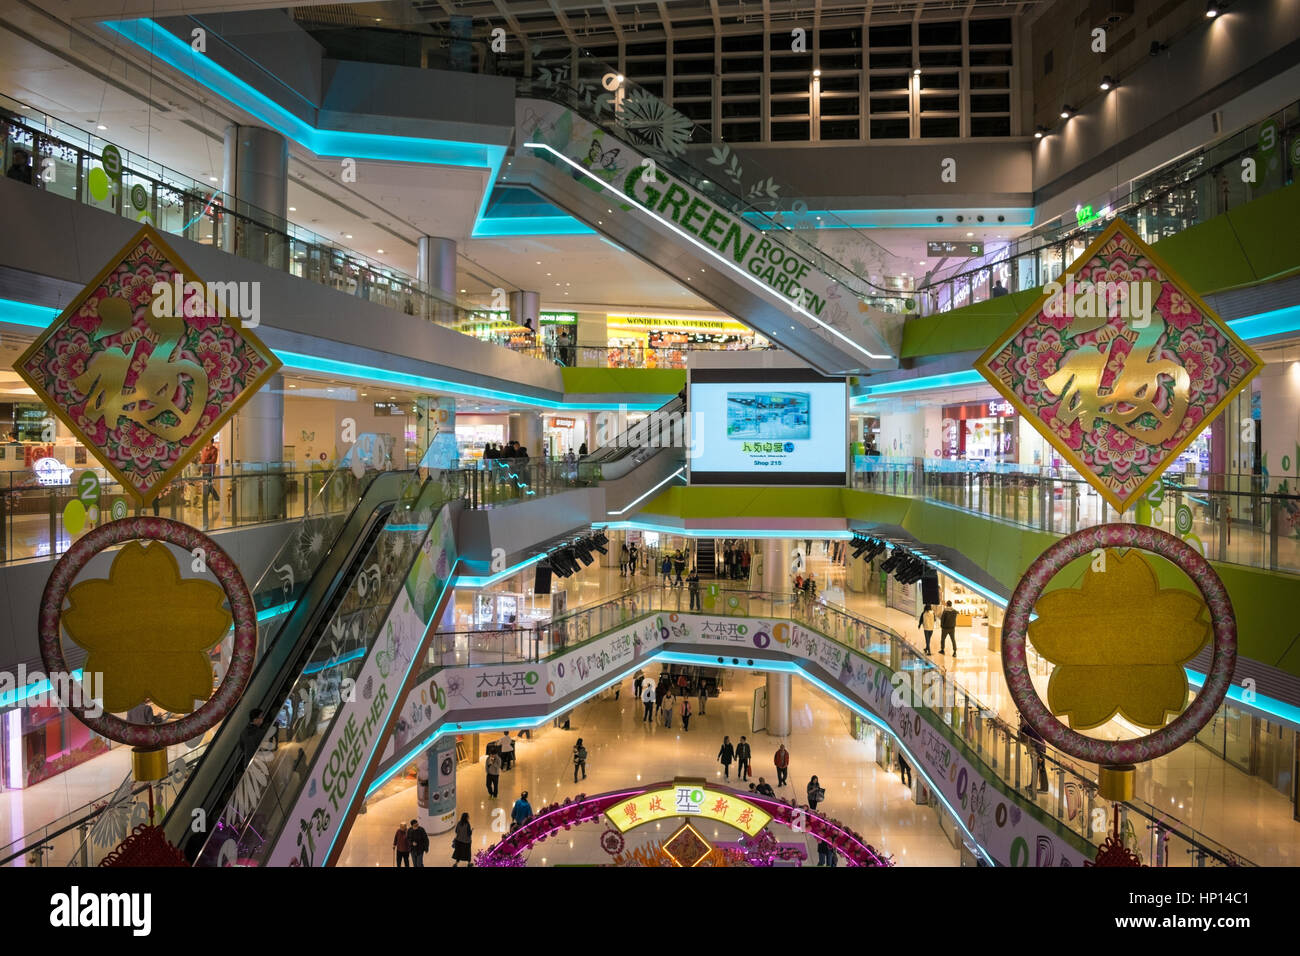 Interior of The Domain shopping mall in Yau Tong district (part of Kowloon) of Hong Kong Stock Photo